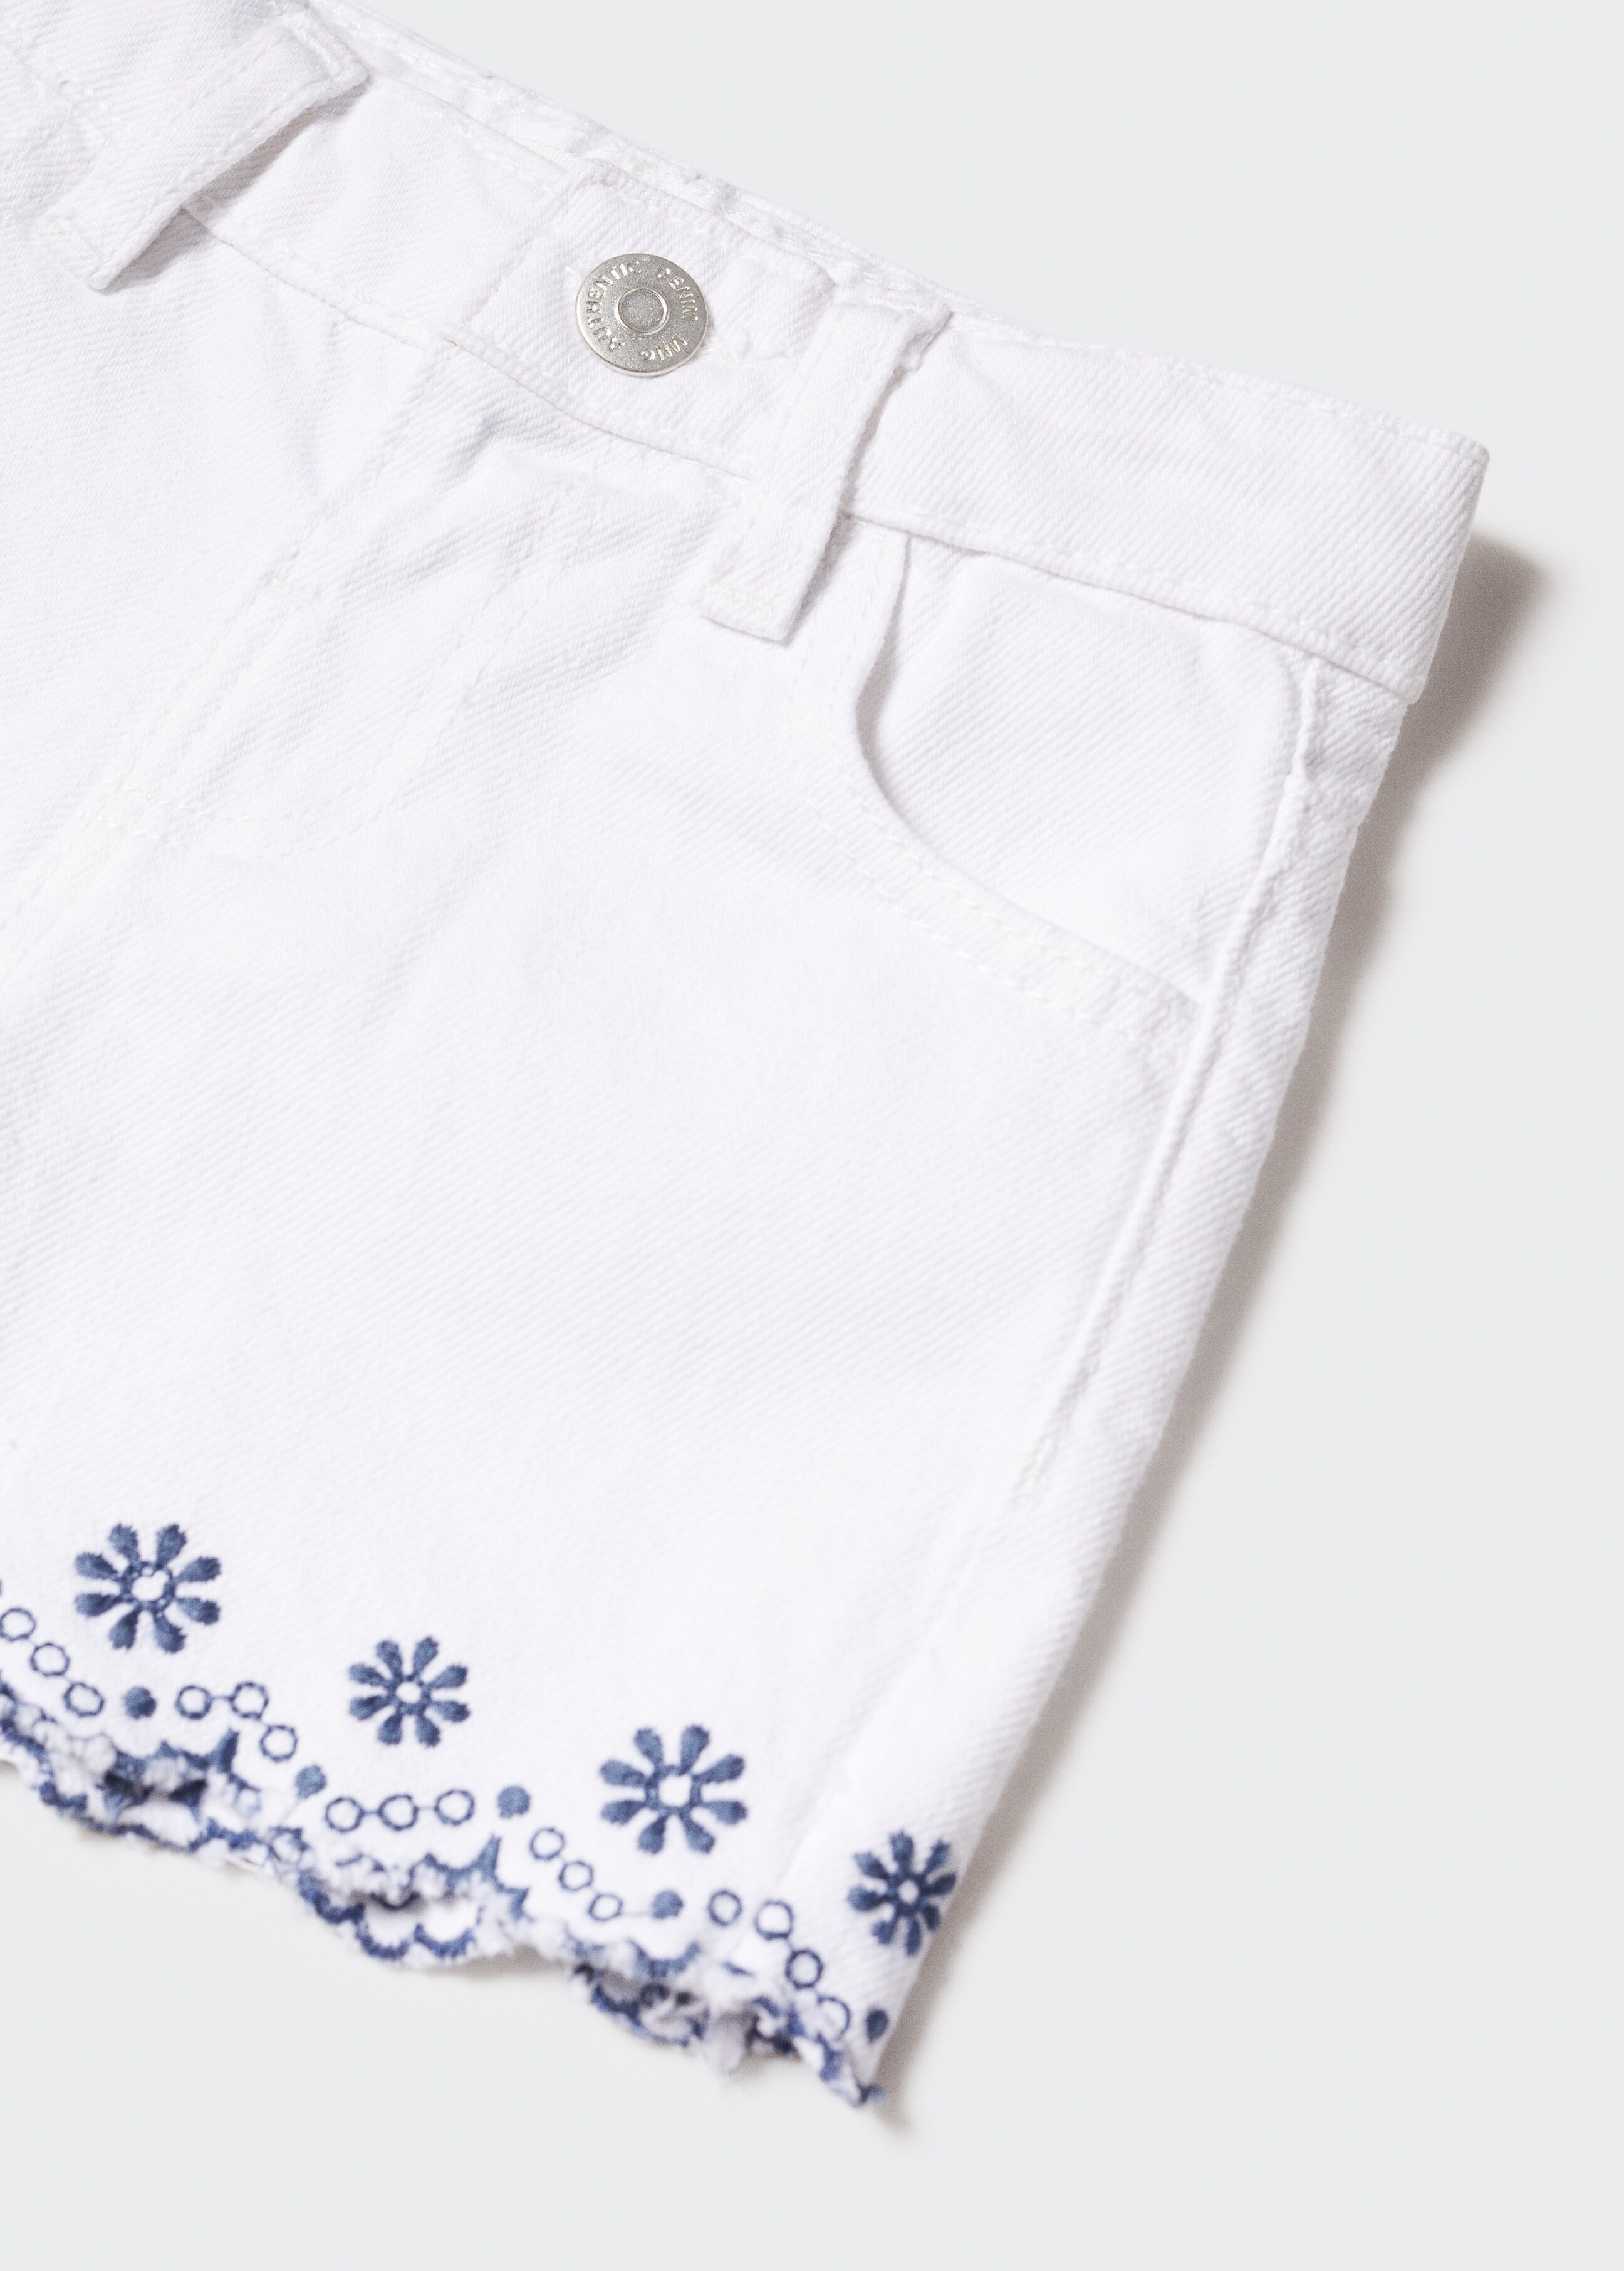 White denim shorts - Details of the article 8